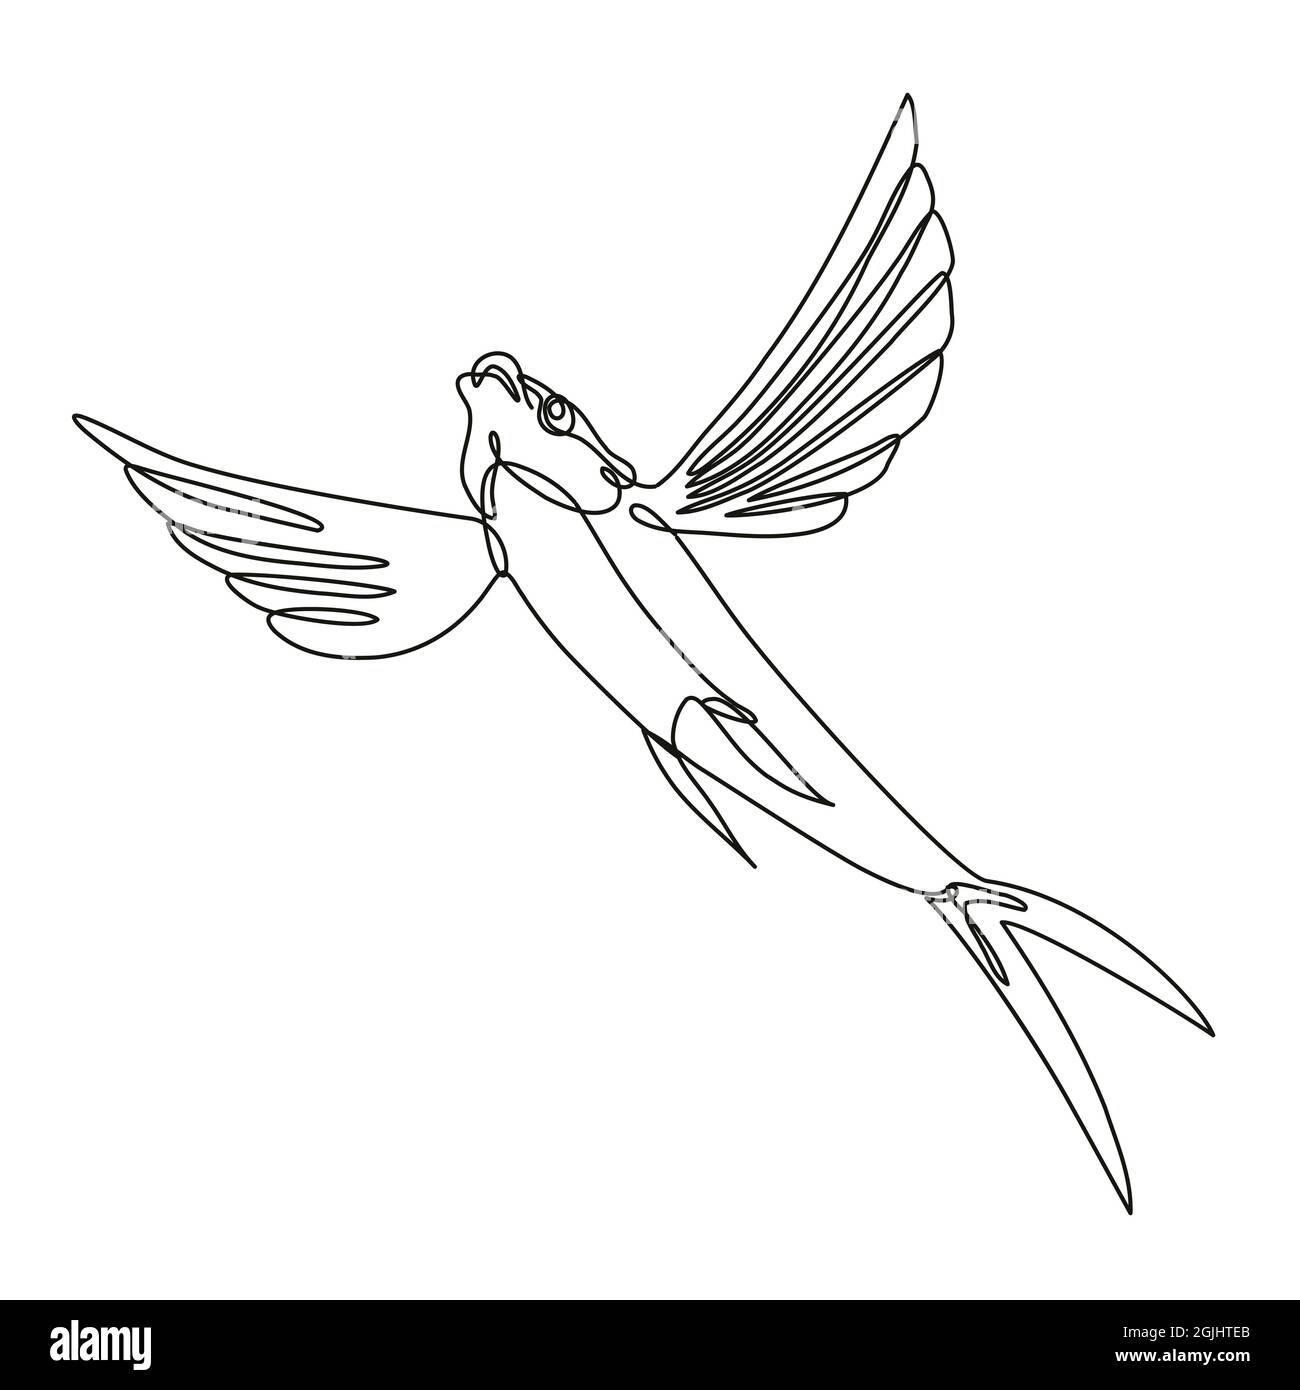 Sailfin Flying Fish Taking Off Continuous Line Drawing Stock Photo